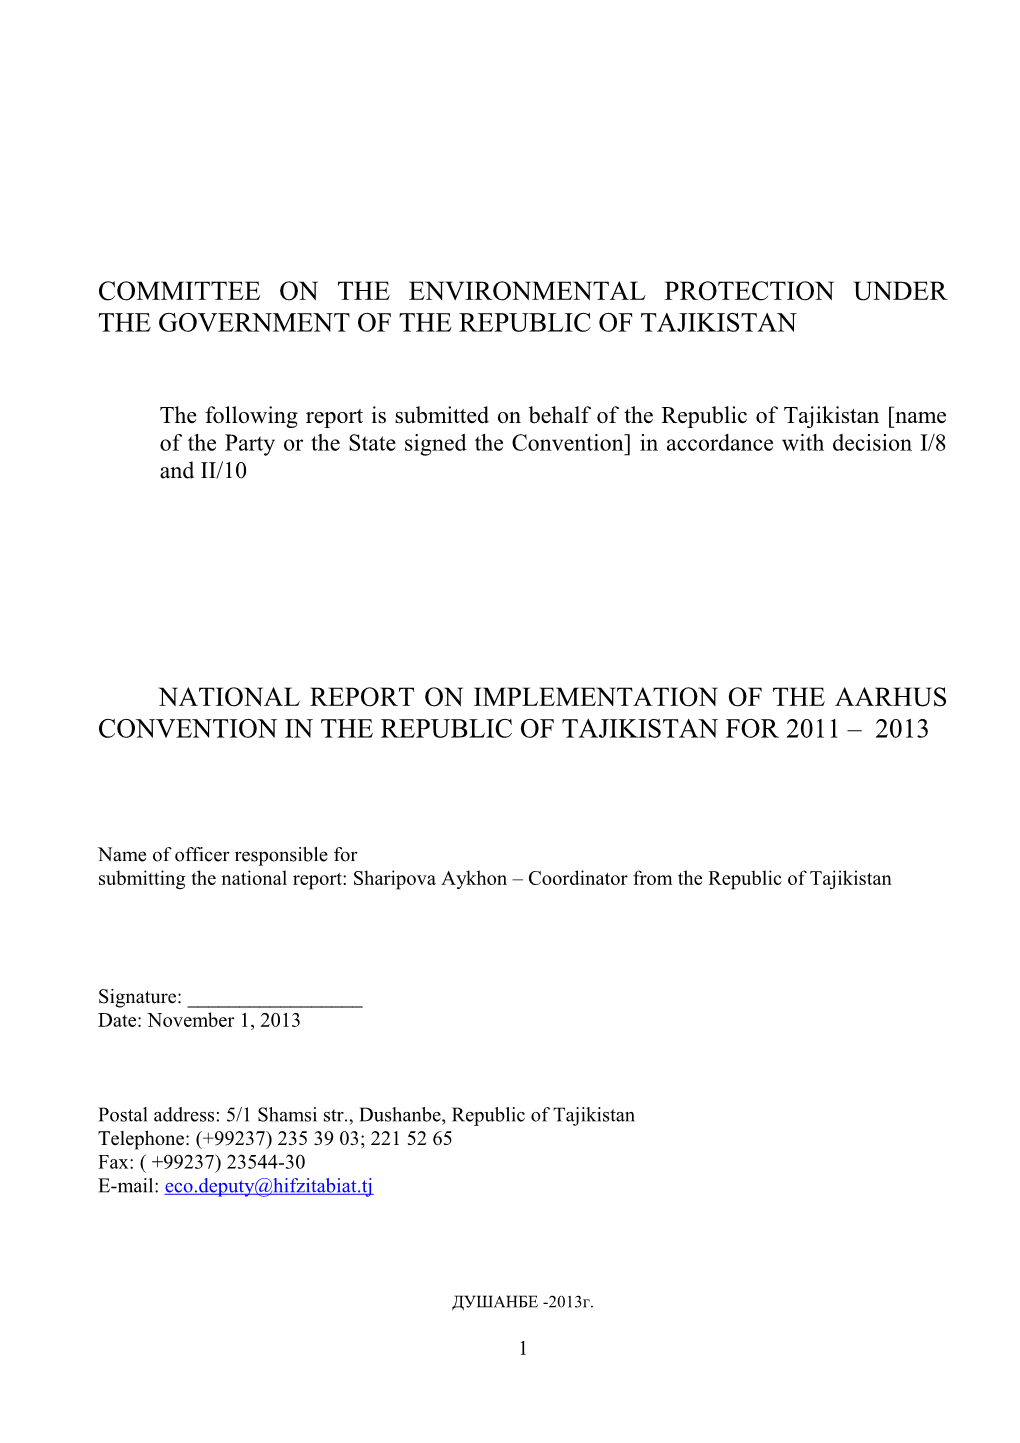 Committee on the Environmental Protection Under the Government of the Republic of Tajikistan